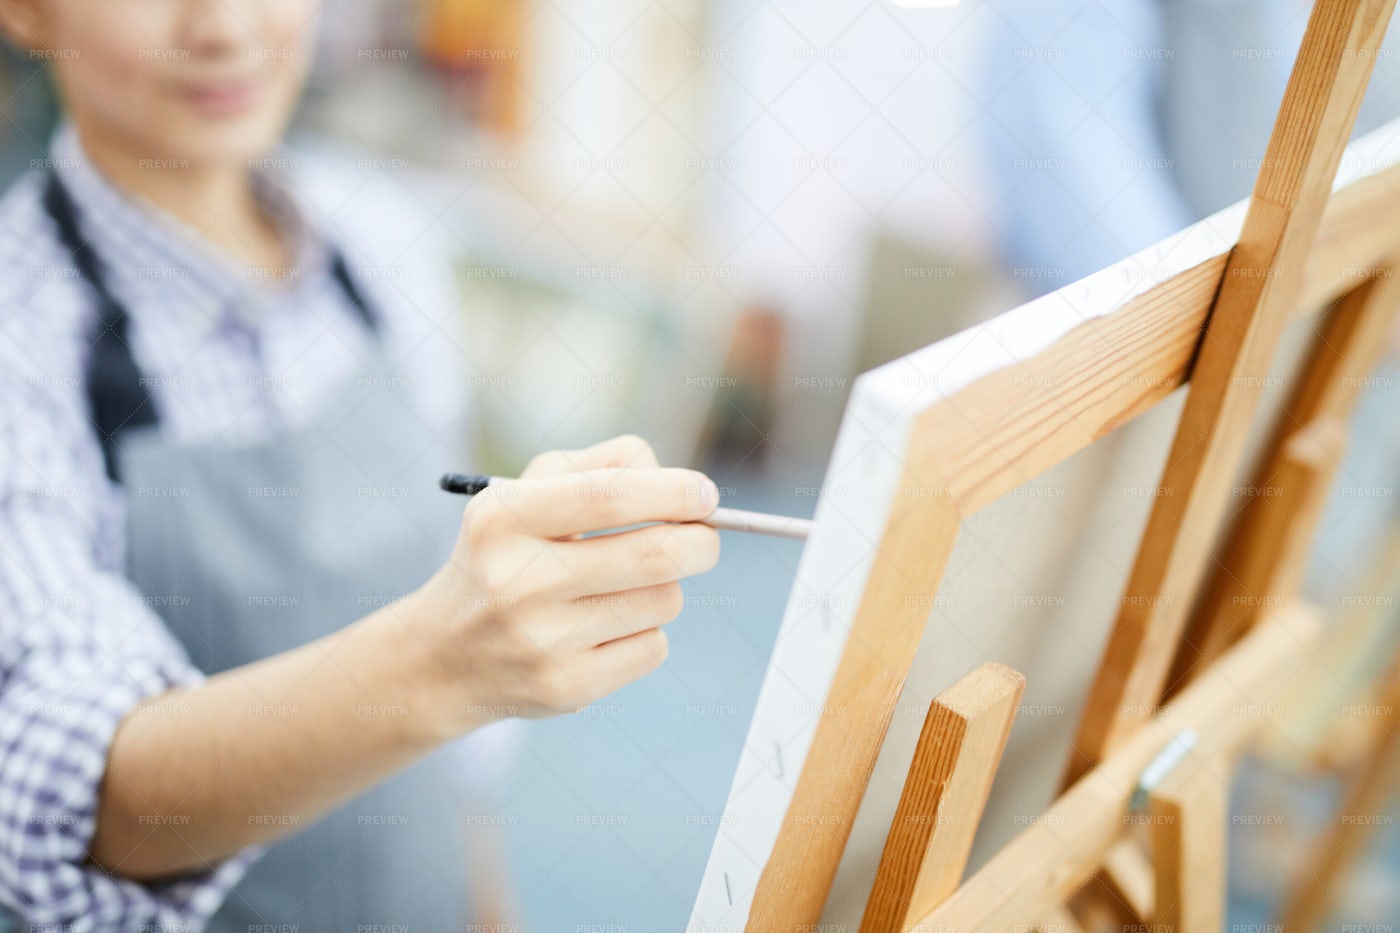 Artist Painting On Easel: Stock Photos